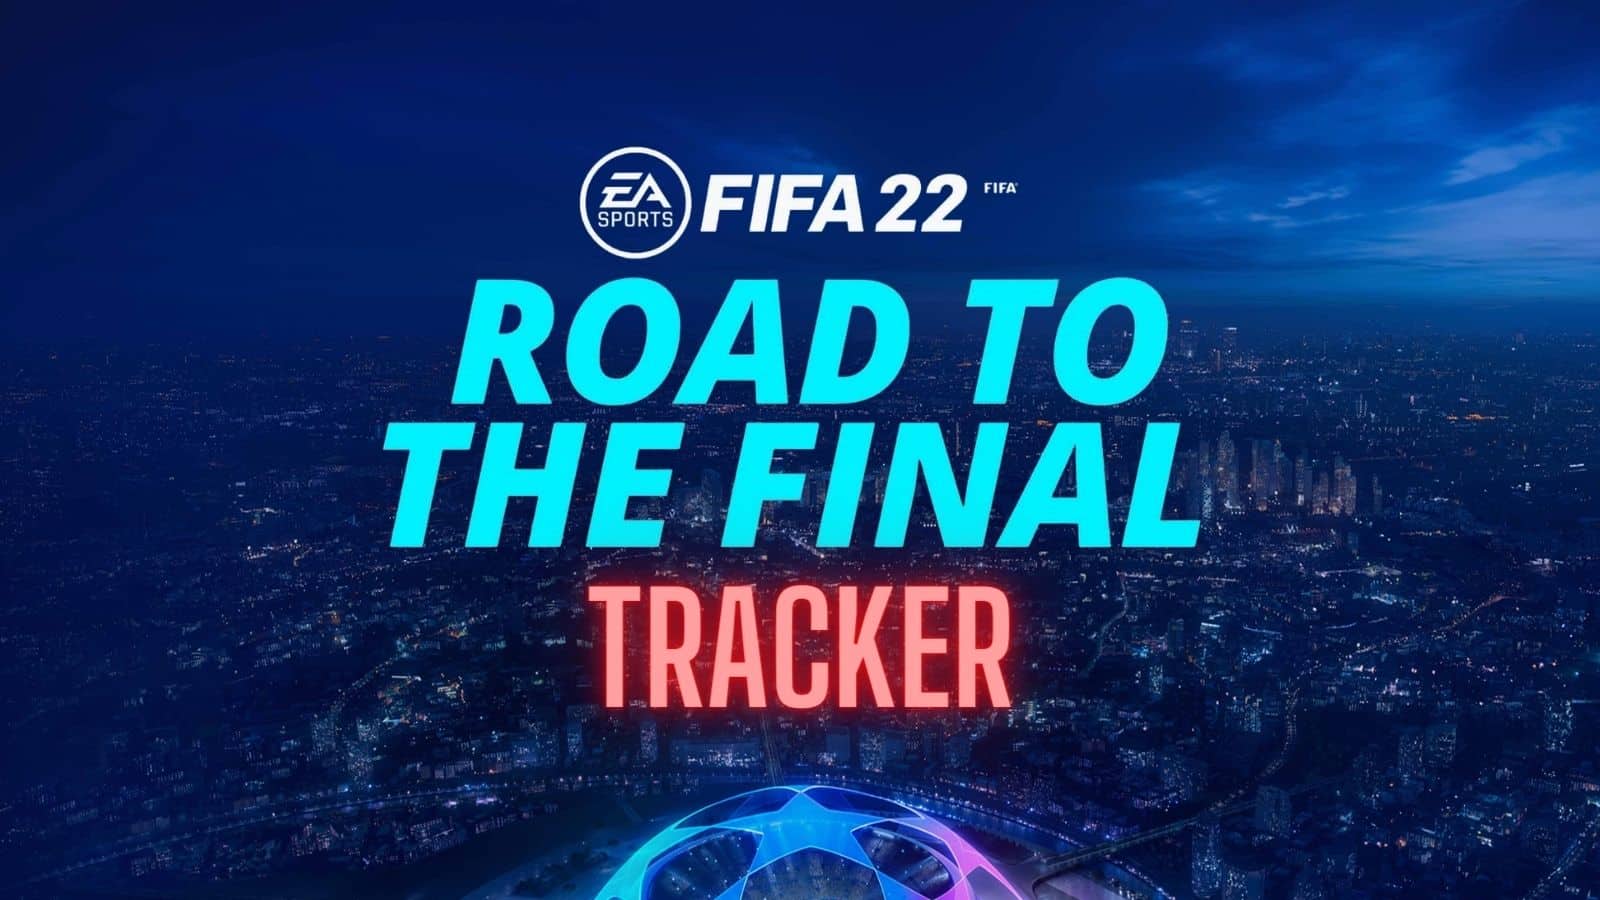 FIFA 22 Road to the Final tracker